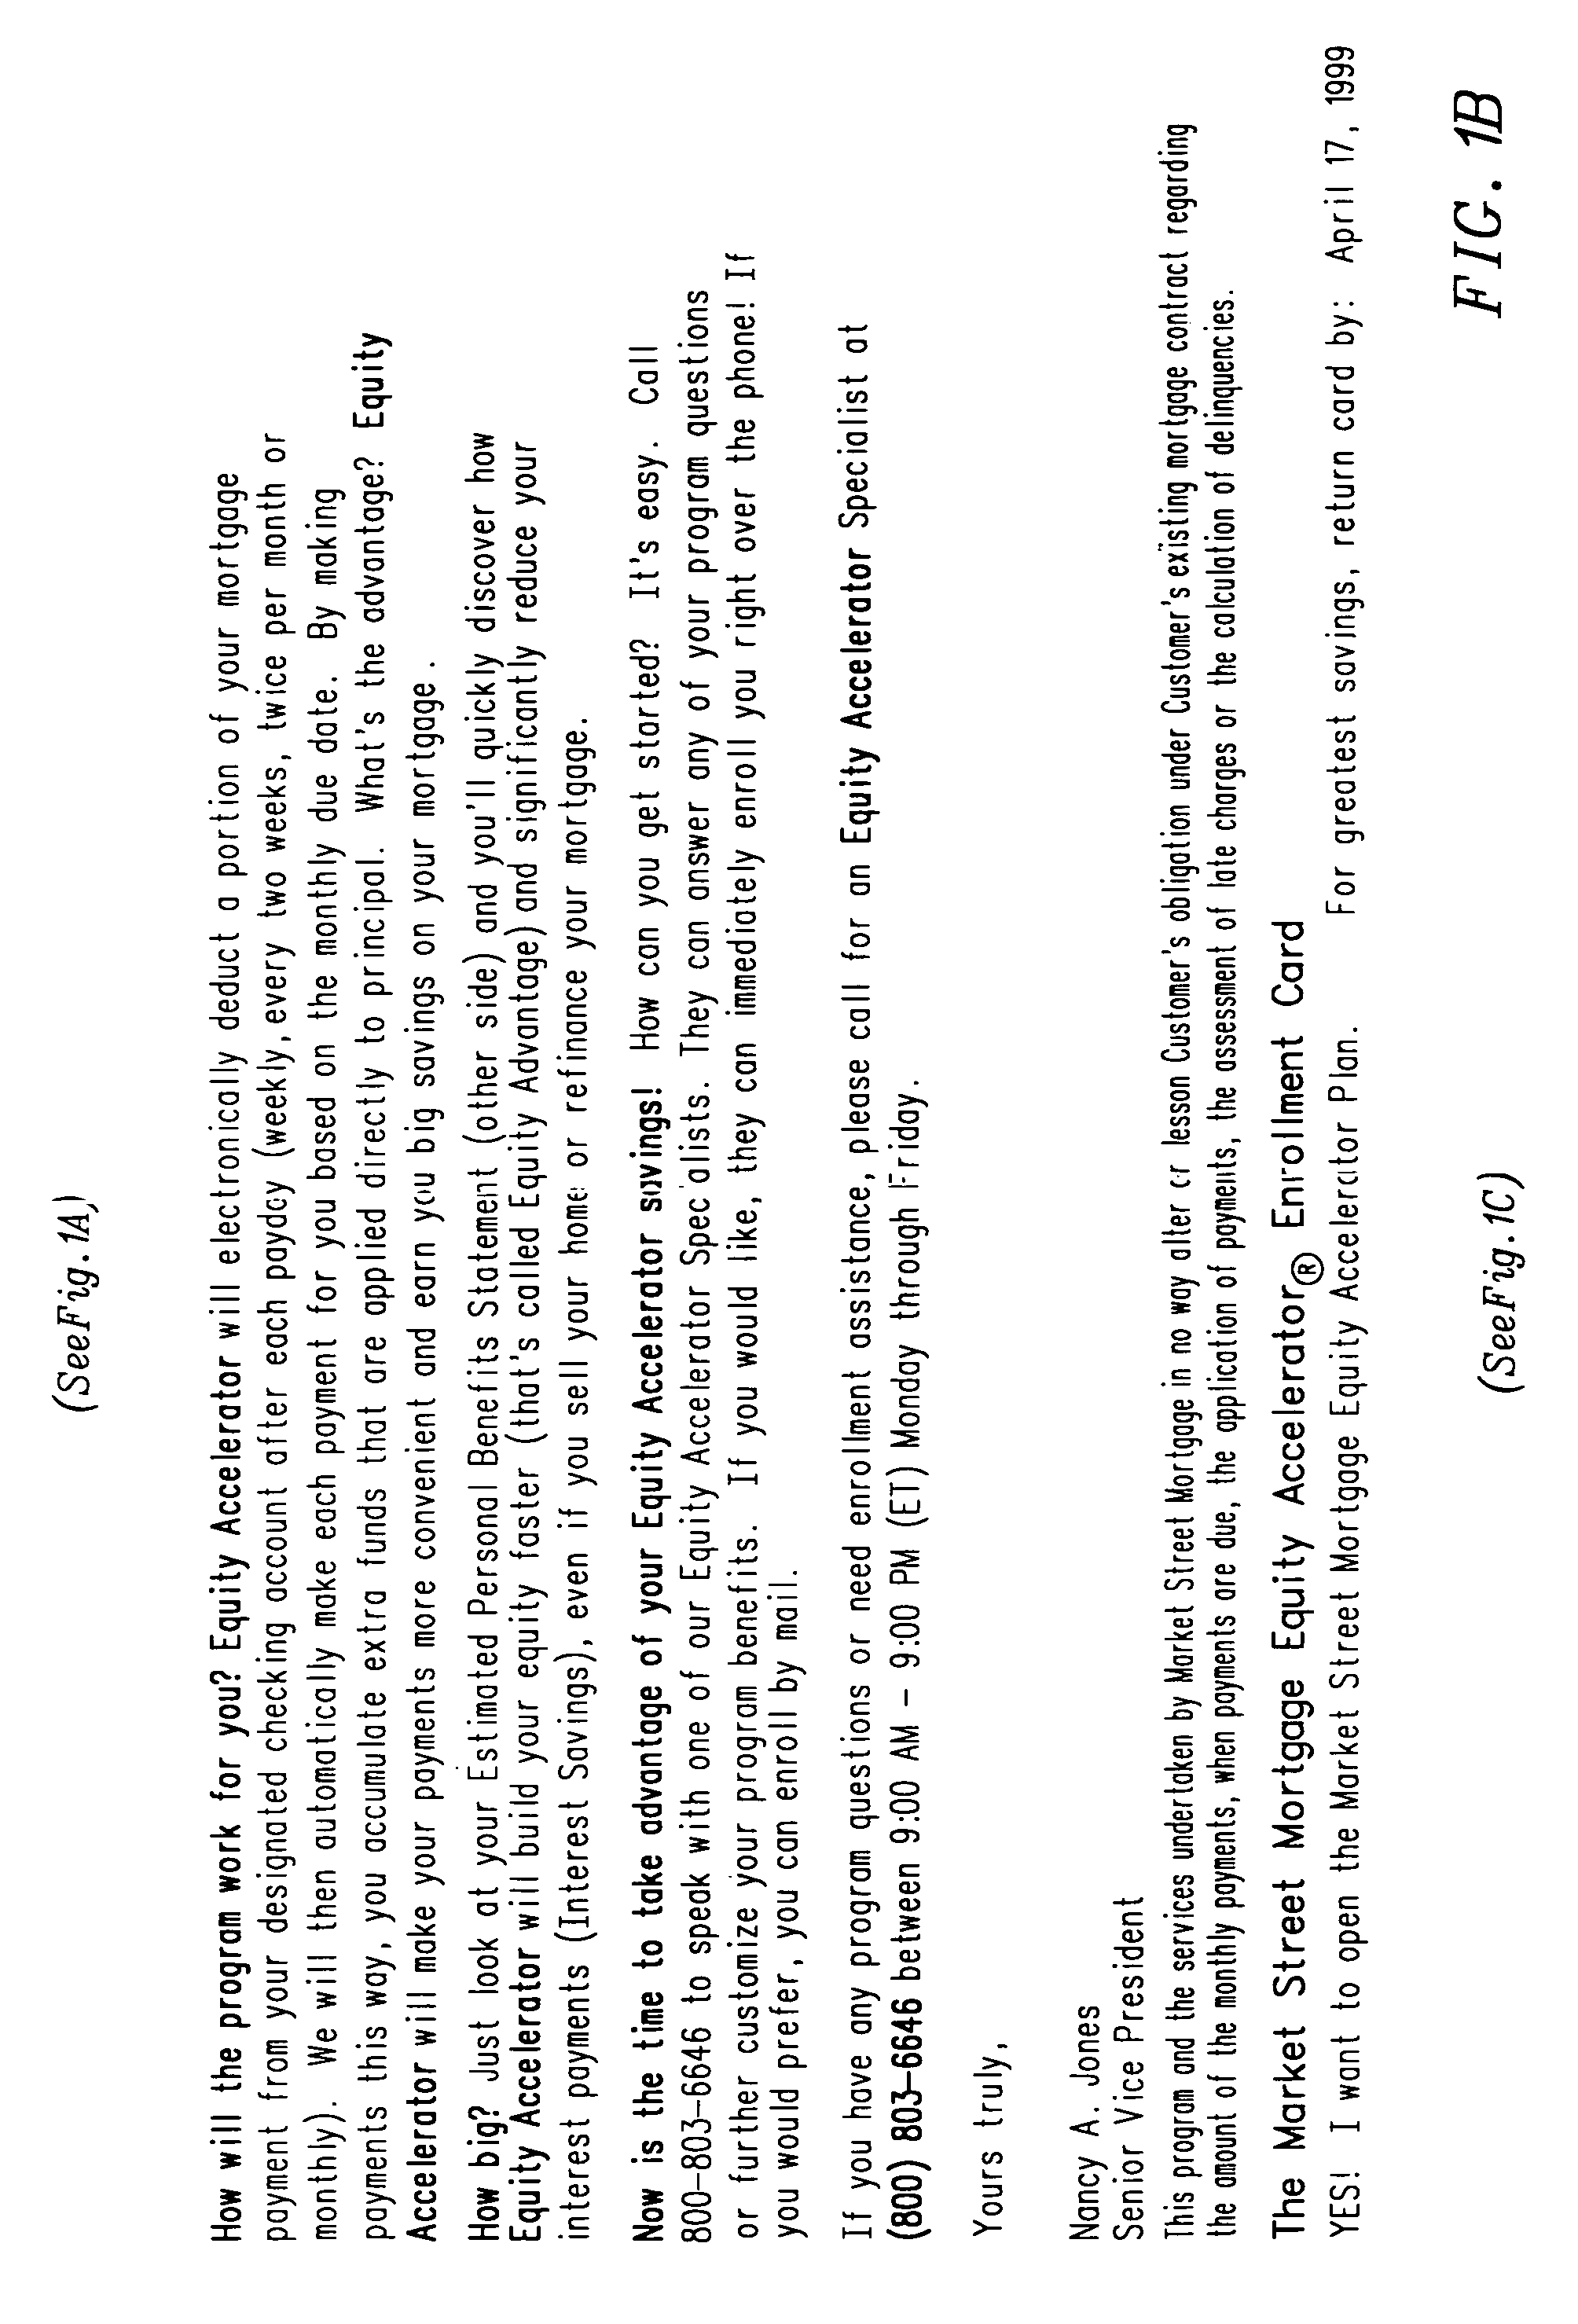 Method and apparatus for preauthorizing electronic fund transfers without actual written authentication